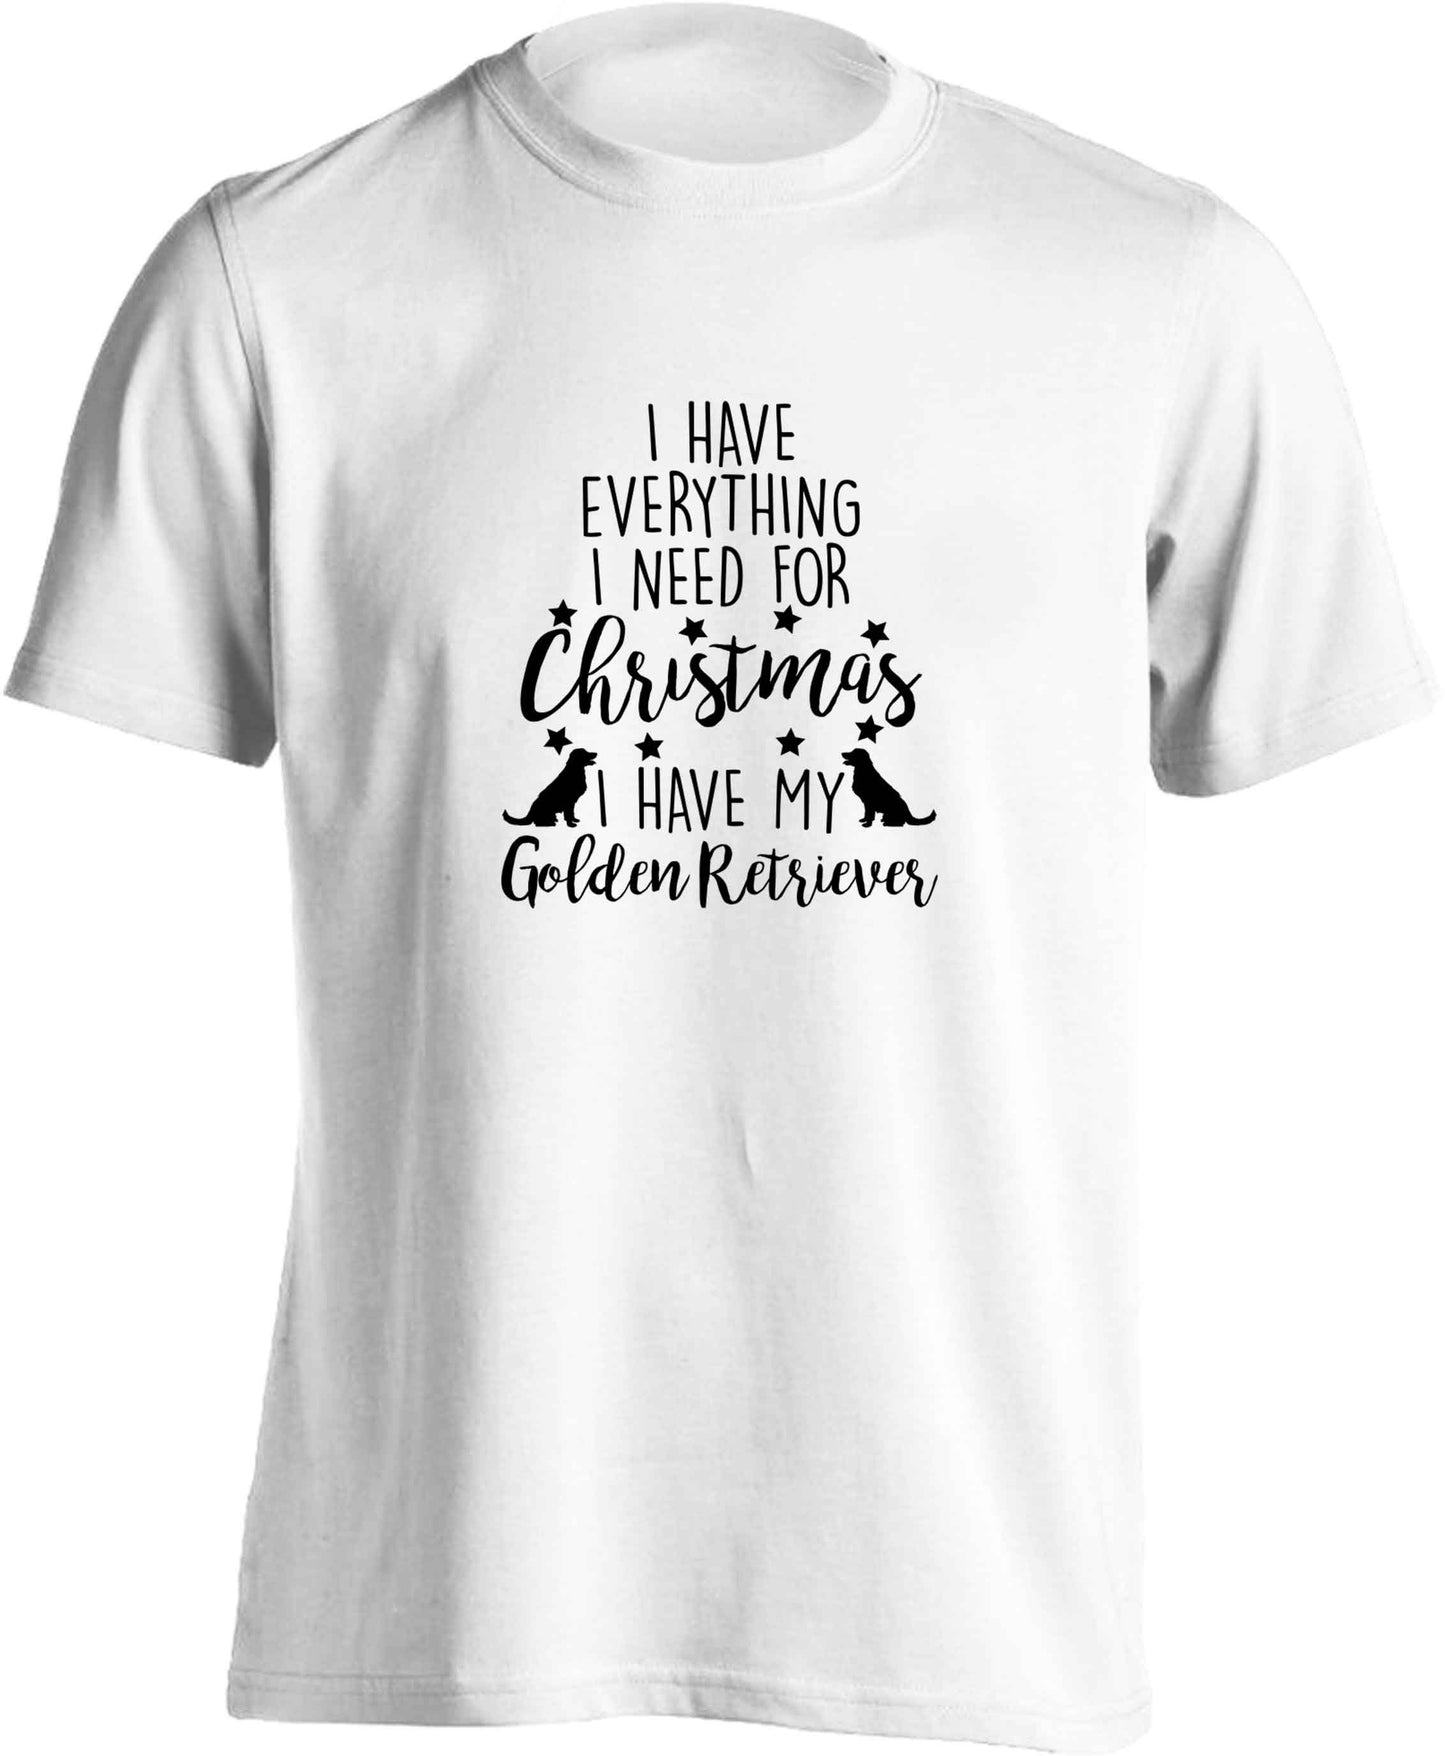 I have everything I need for Christmas I have my golden retriever adults unisex white Tshirt 2XL